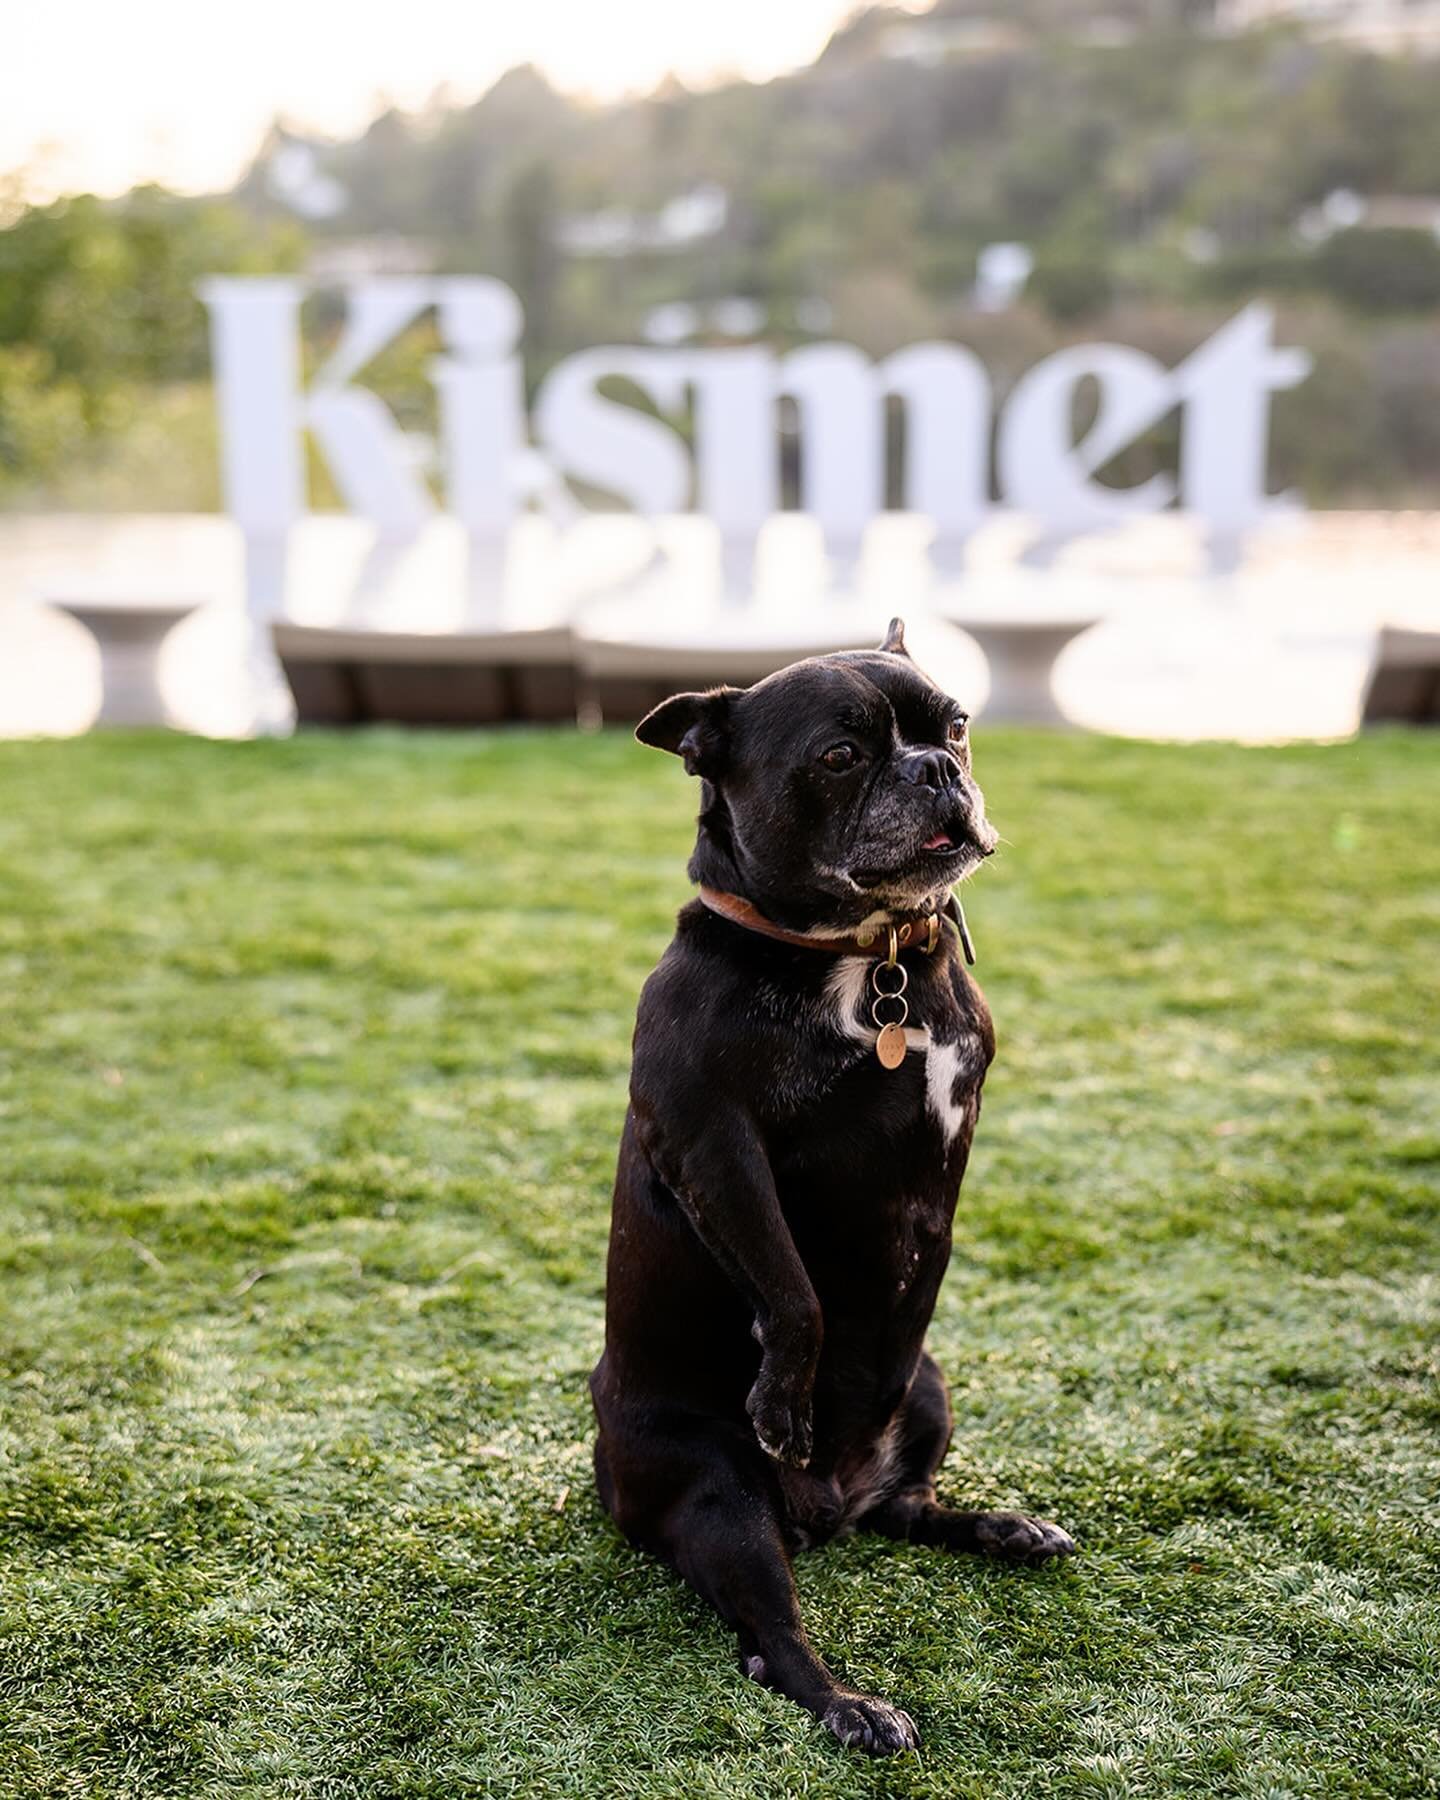 Penny, I just love you. The perfect @kismet poolside model! Swipe for some #bts - we build it and brand it, always!

#thewotp #wifeoftheparty #kismet #penny #k9 #dogsofinstagram